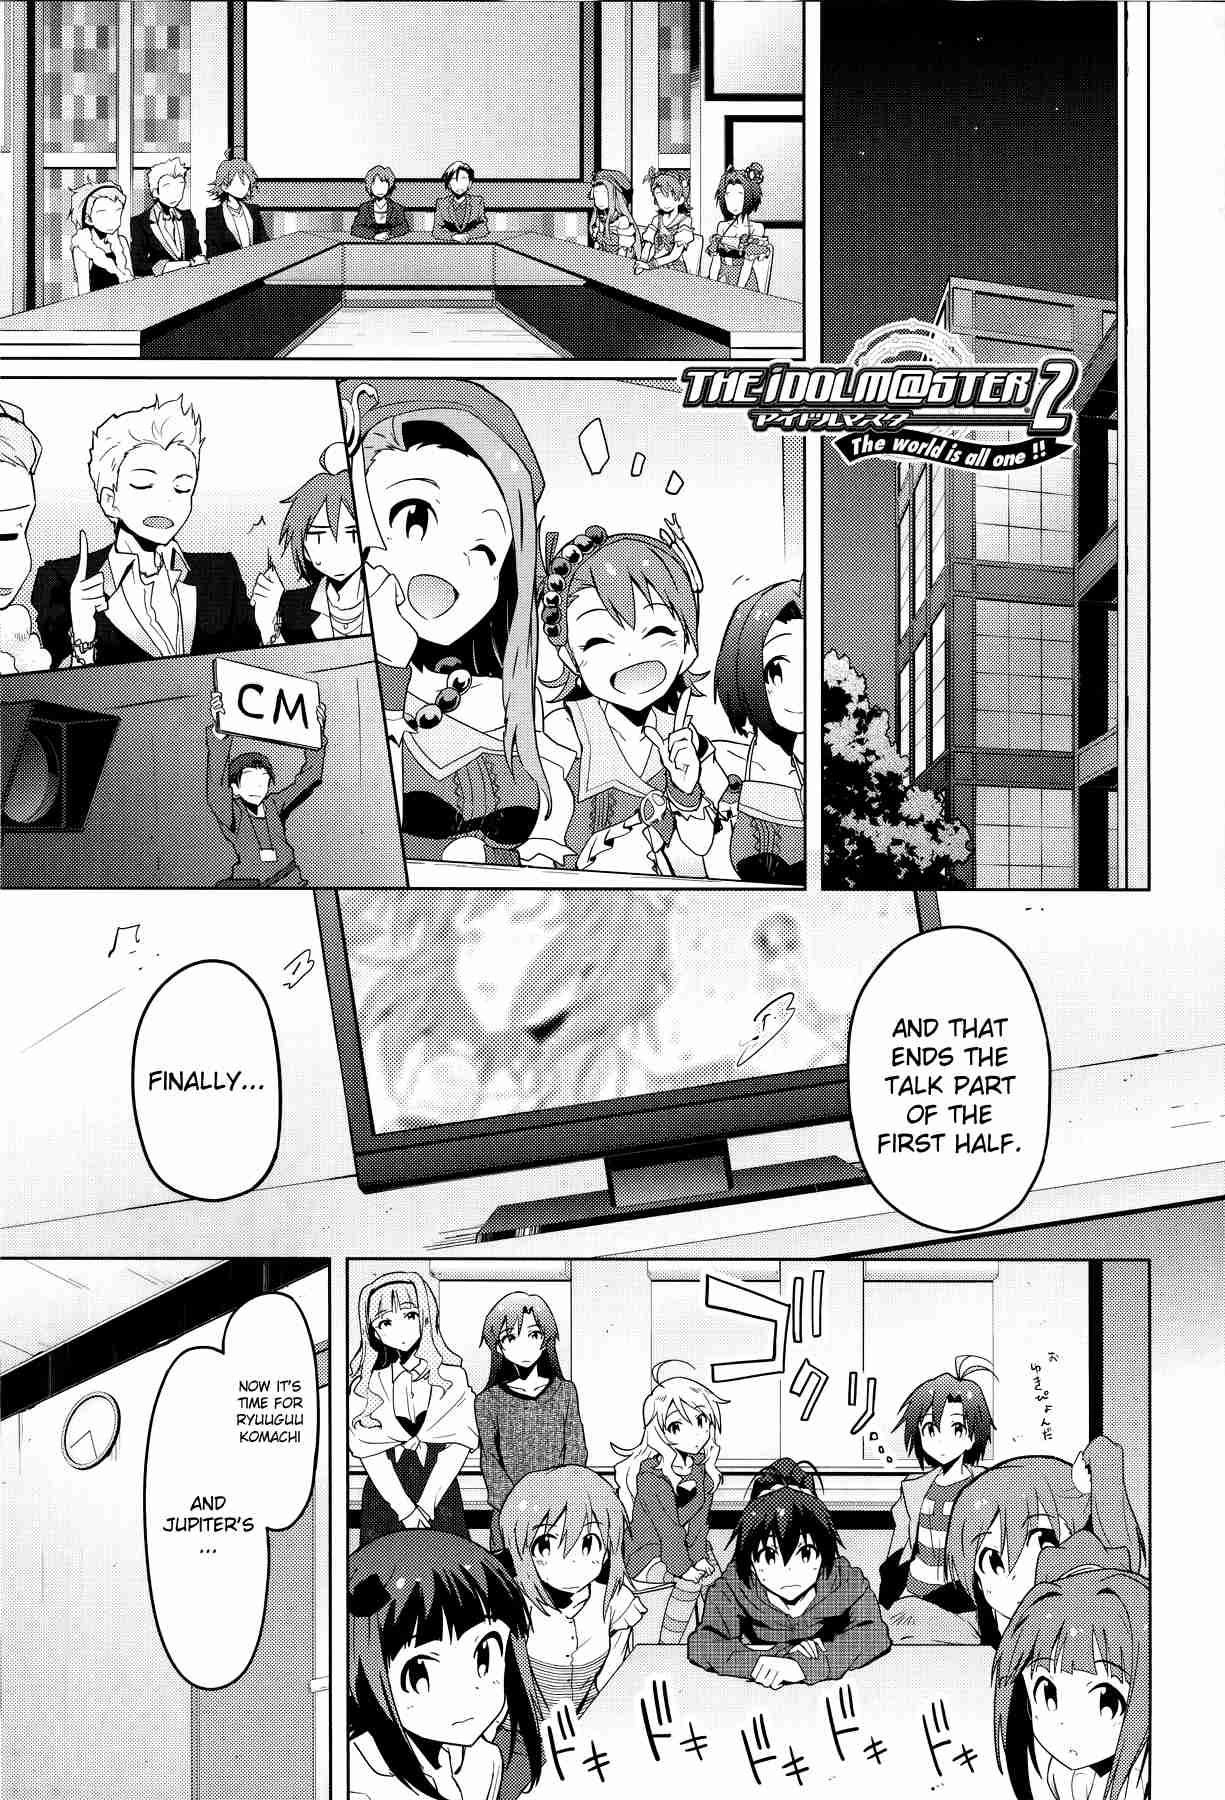 THE iDOLM@STER 2 The world is all one!! Vol. 4 Ch. 24 Another Bond